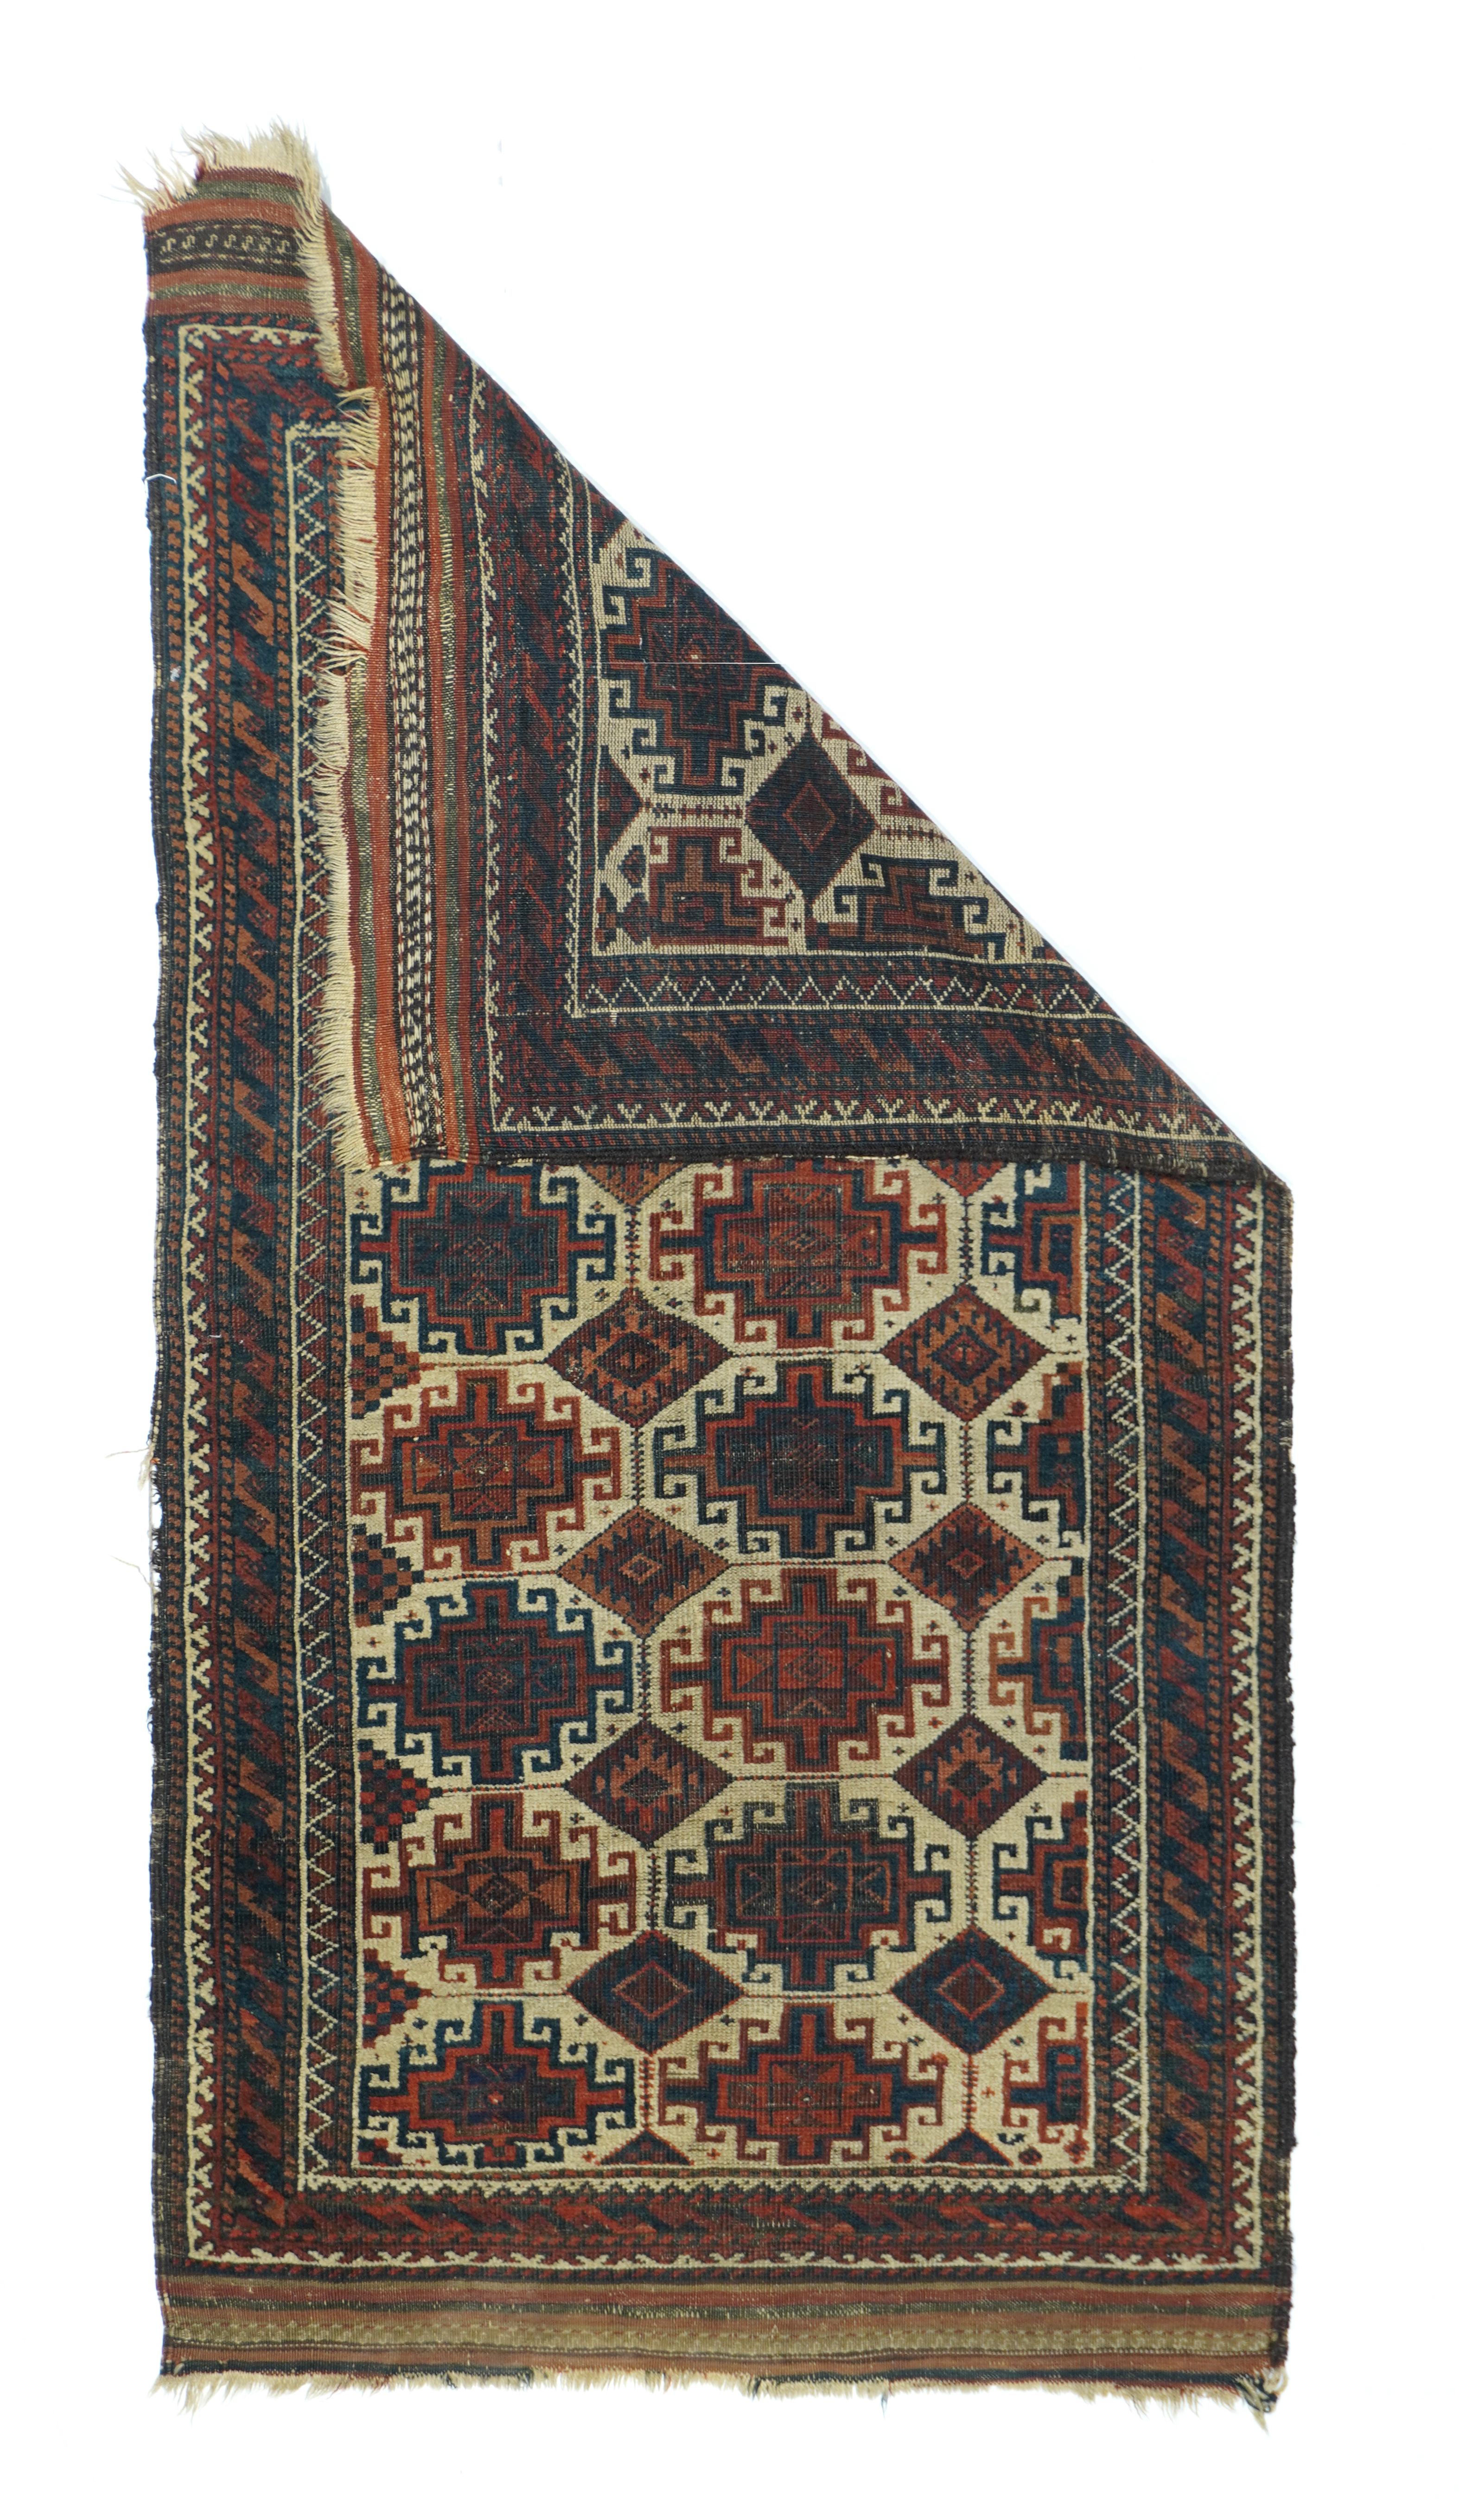 Antique Persian Balouch Tribal Rug 2'9'' x 5'2'' The medium camel-tone field shows a side-slipped pattern of two and one half columns each of eight hooked 